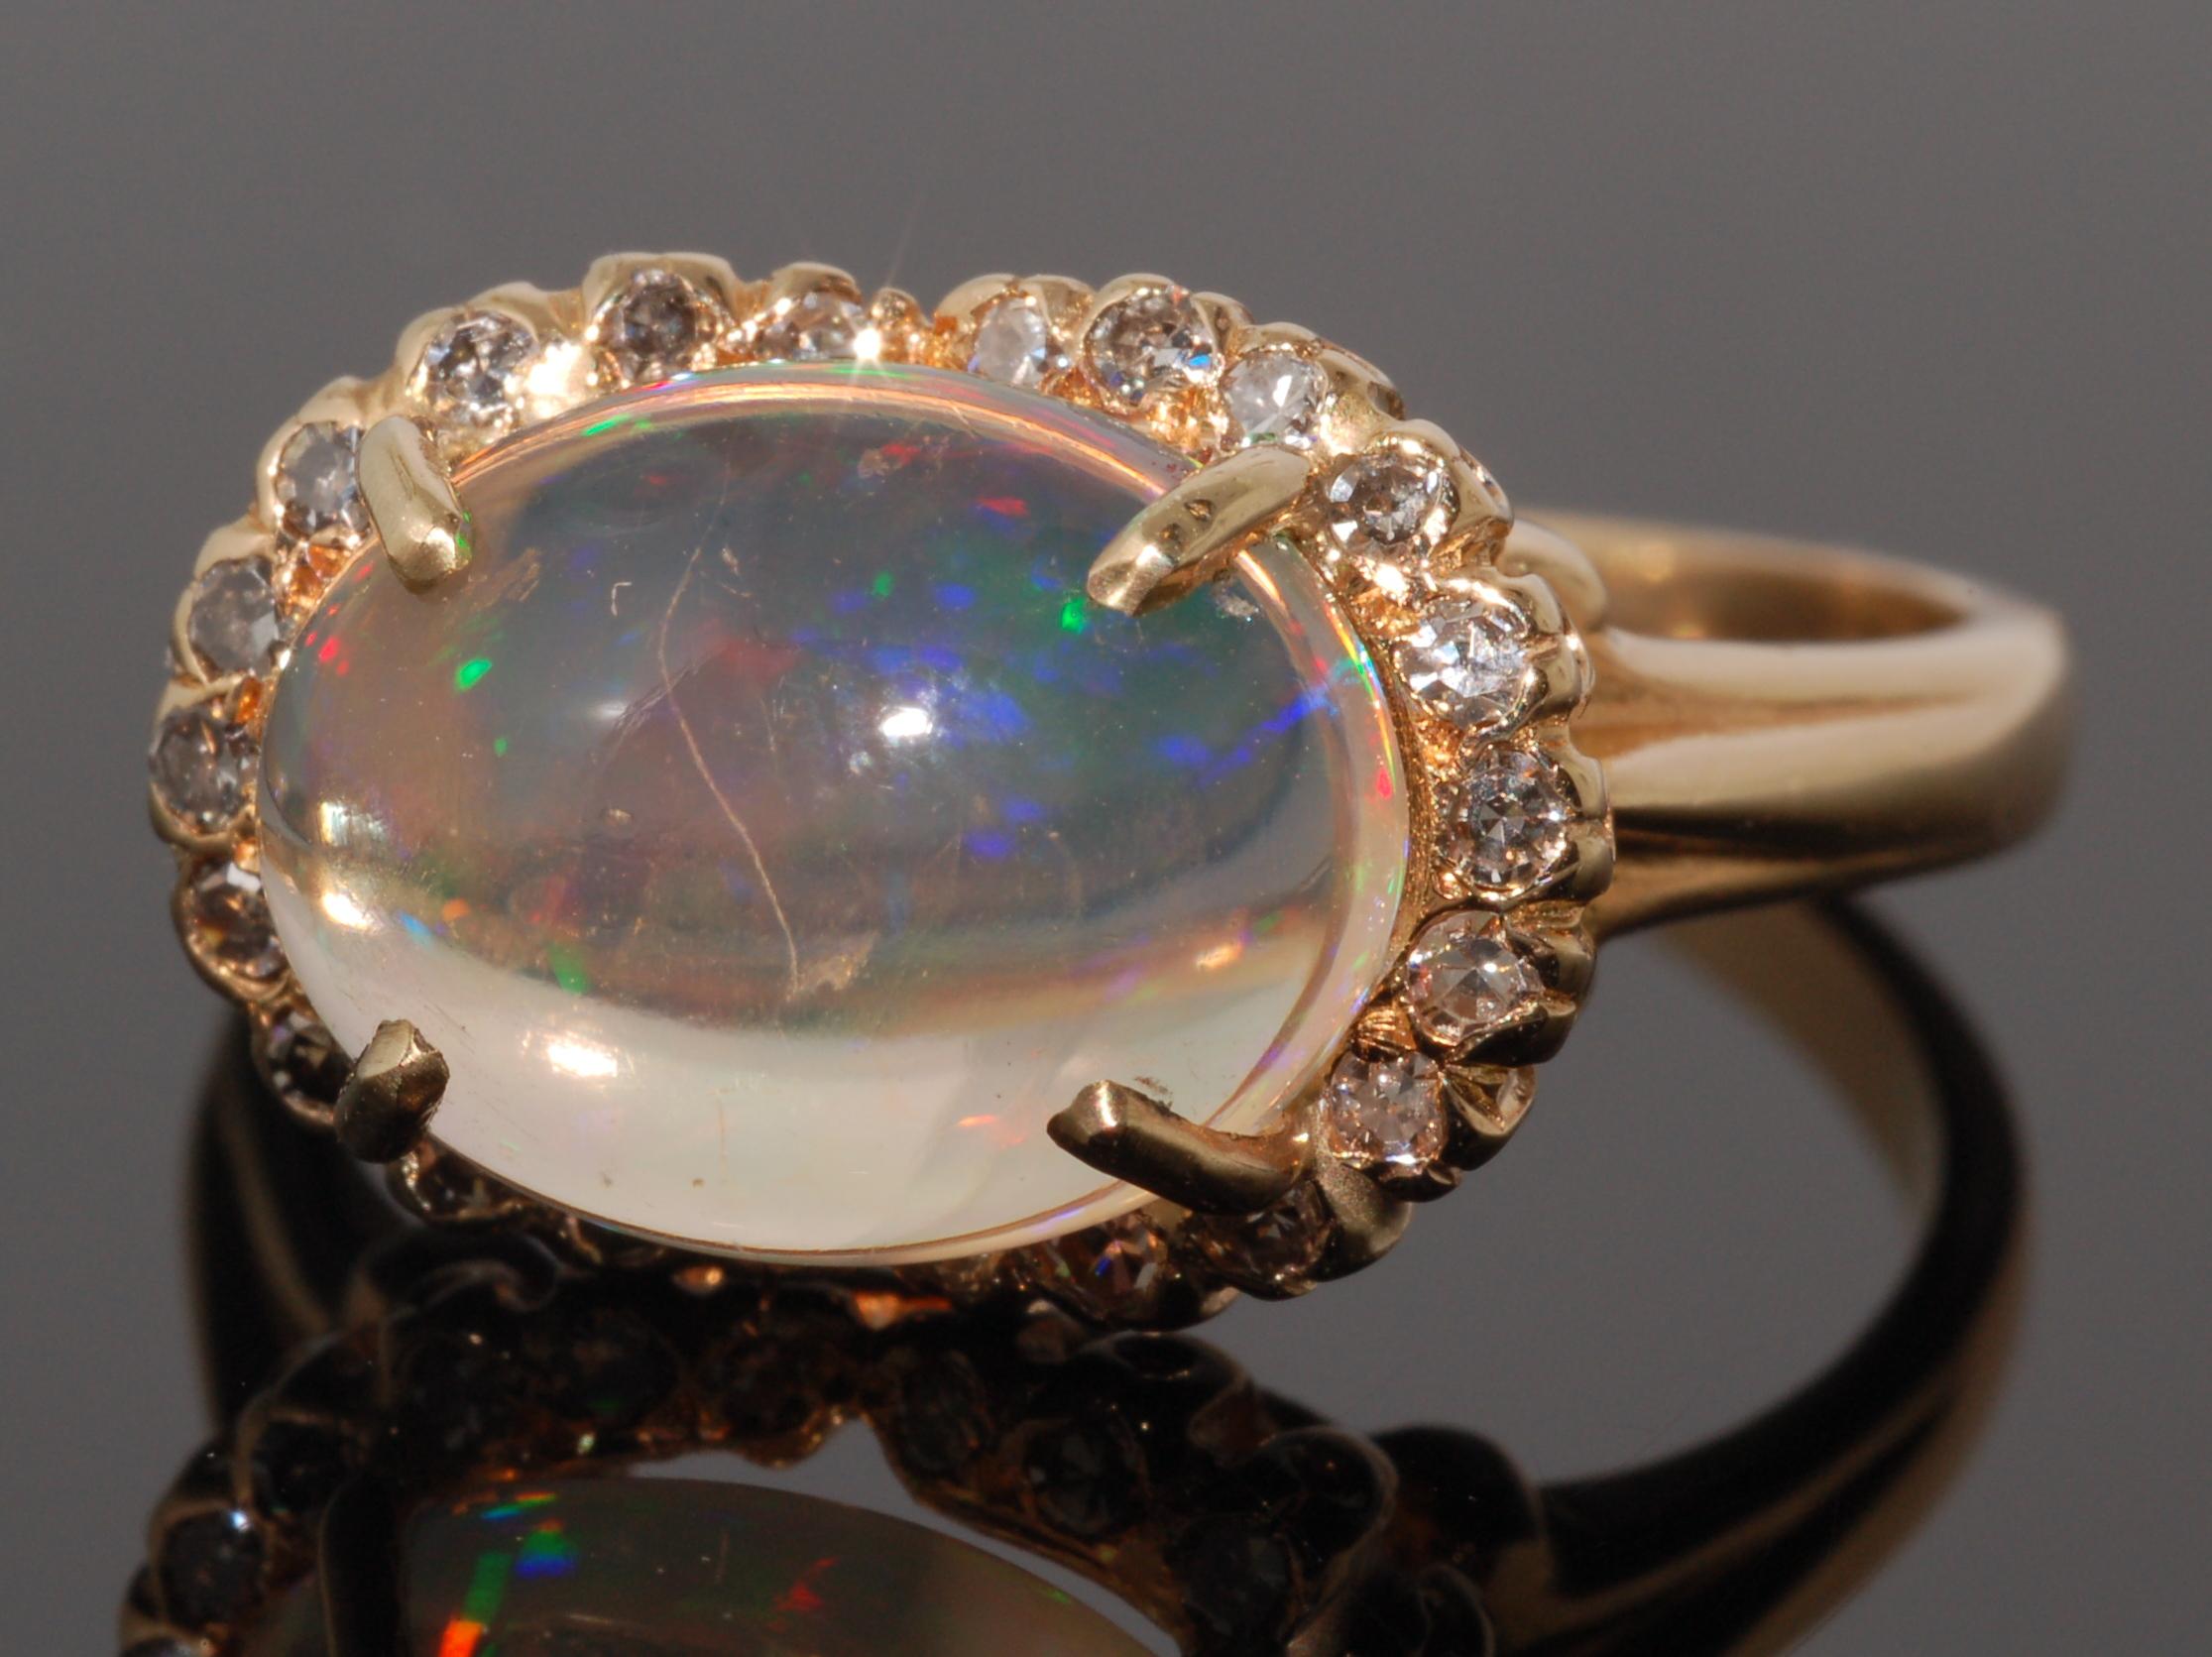 Jelly Opal and Diamond Cluster Ring

A transparent opal cabochon with red, green and yellow play of color, weighing approximately 3.90cts, is set within a scalloped halo of round diamonds totaling approximately 0.50ct, mounted in 18 karat yellow